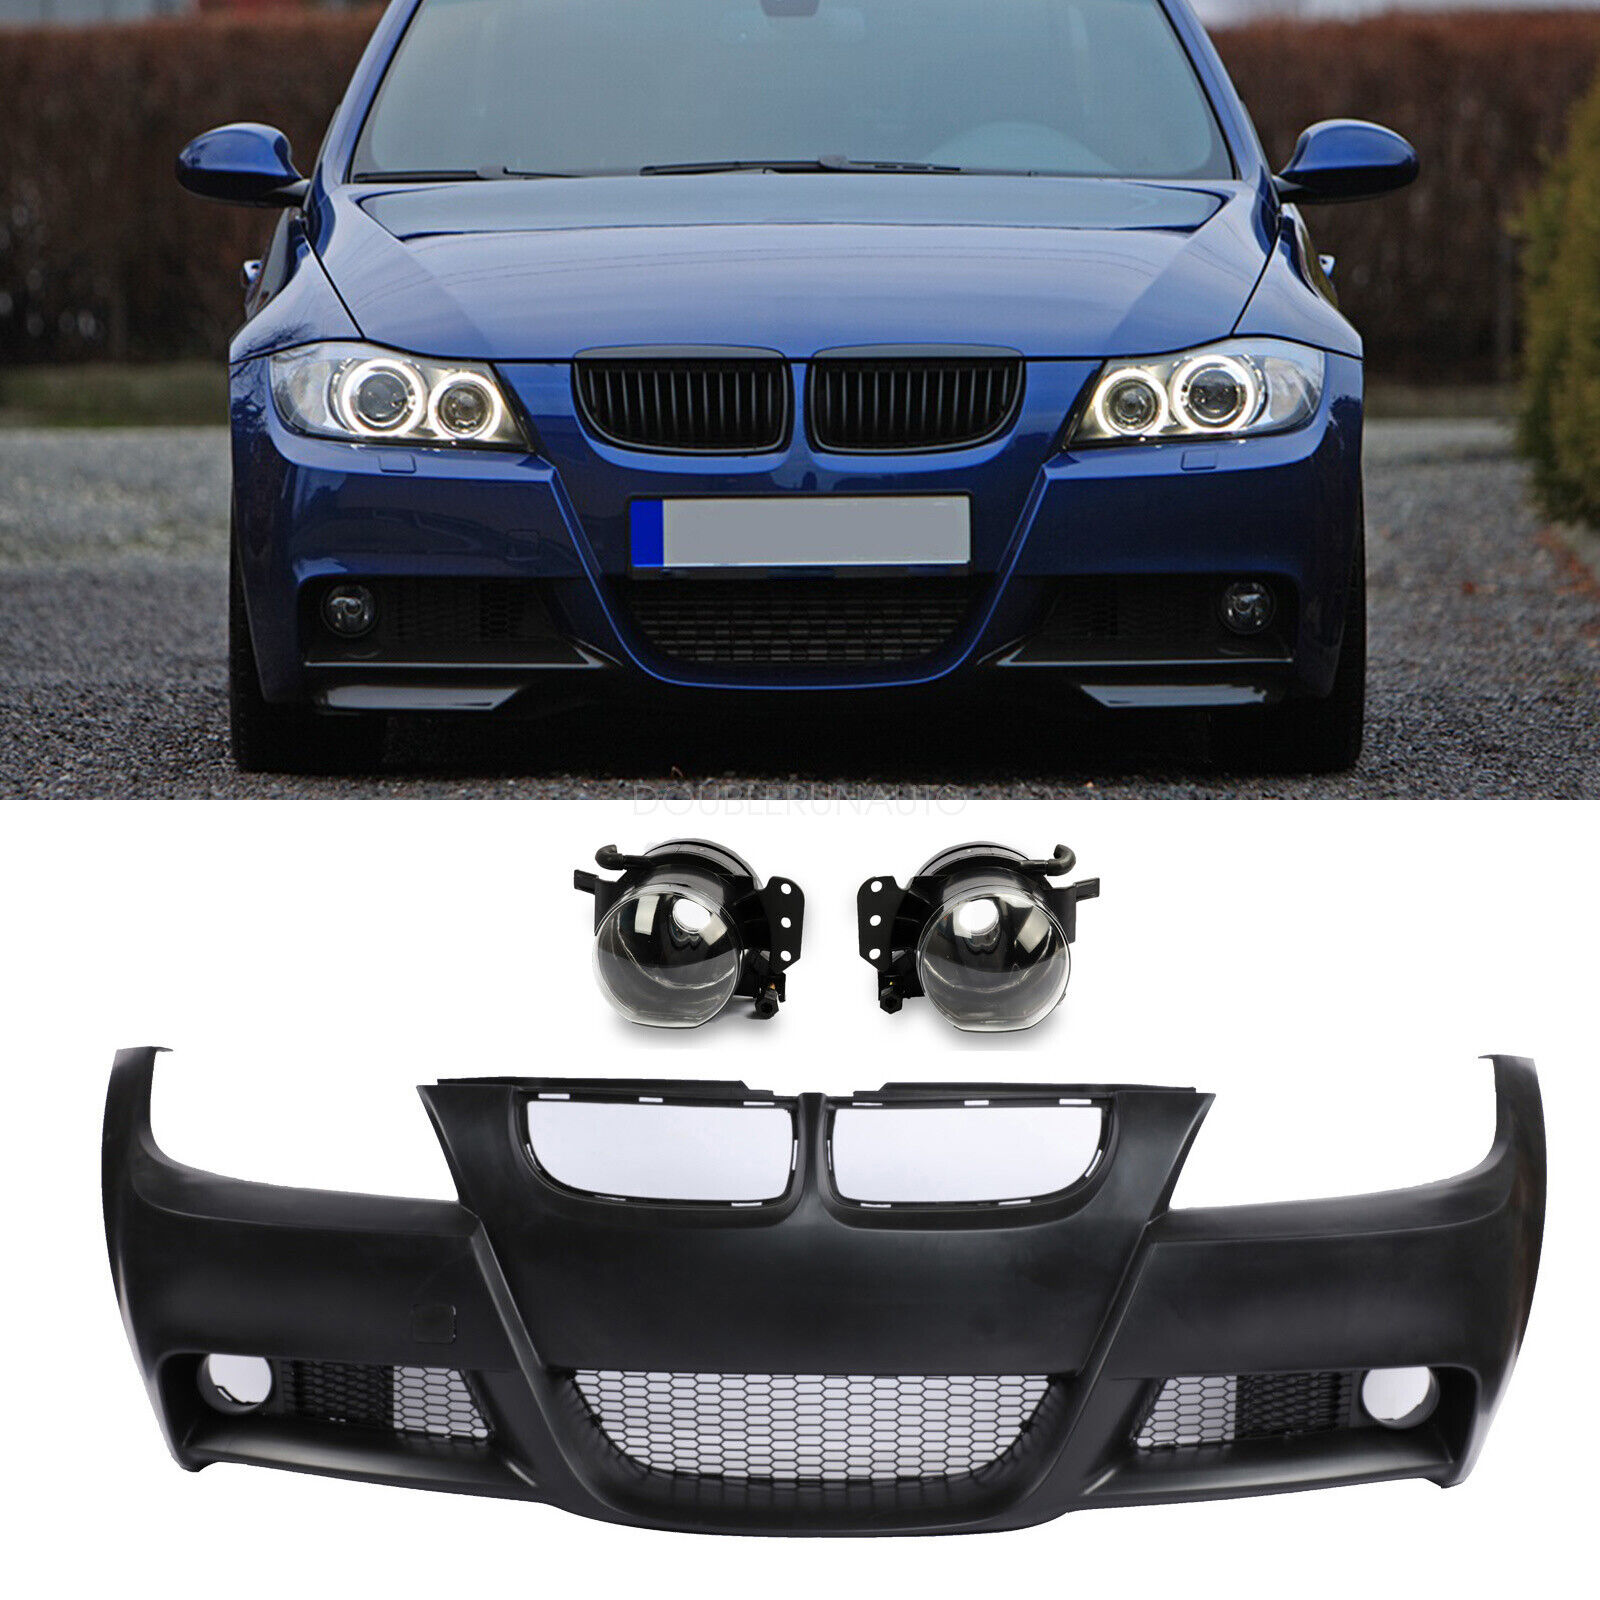 Mtech Style Front Bumper Cover Kit For BMW E90 3 Series 328i 330i W/ Fog 05-08